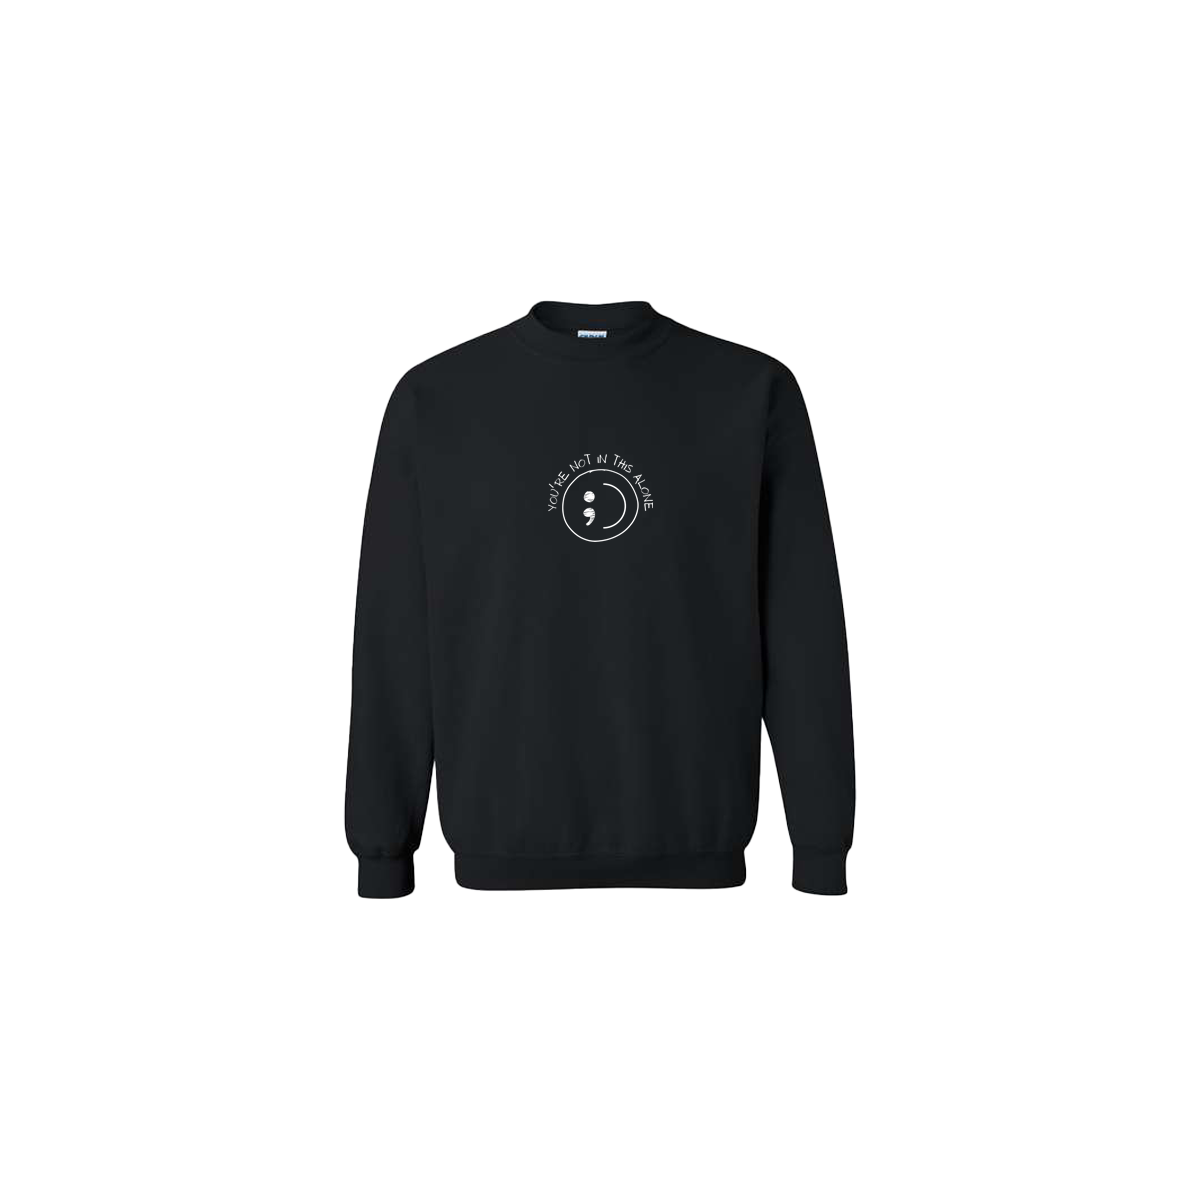 You're Not In This Alone Embroidered Black Crewneck - Mental Health Awareness Clothing